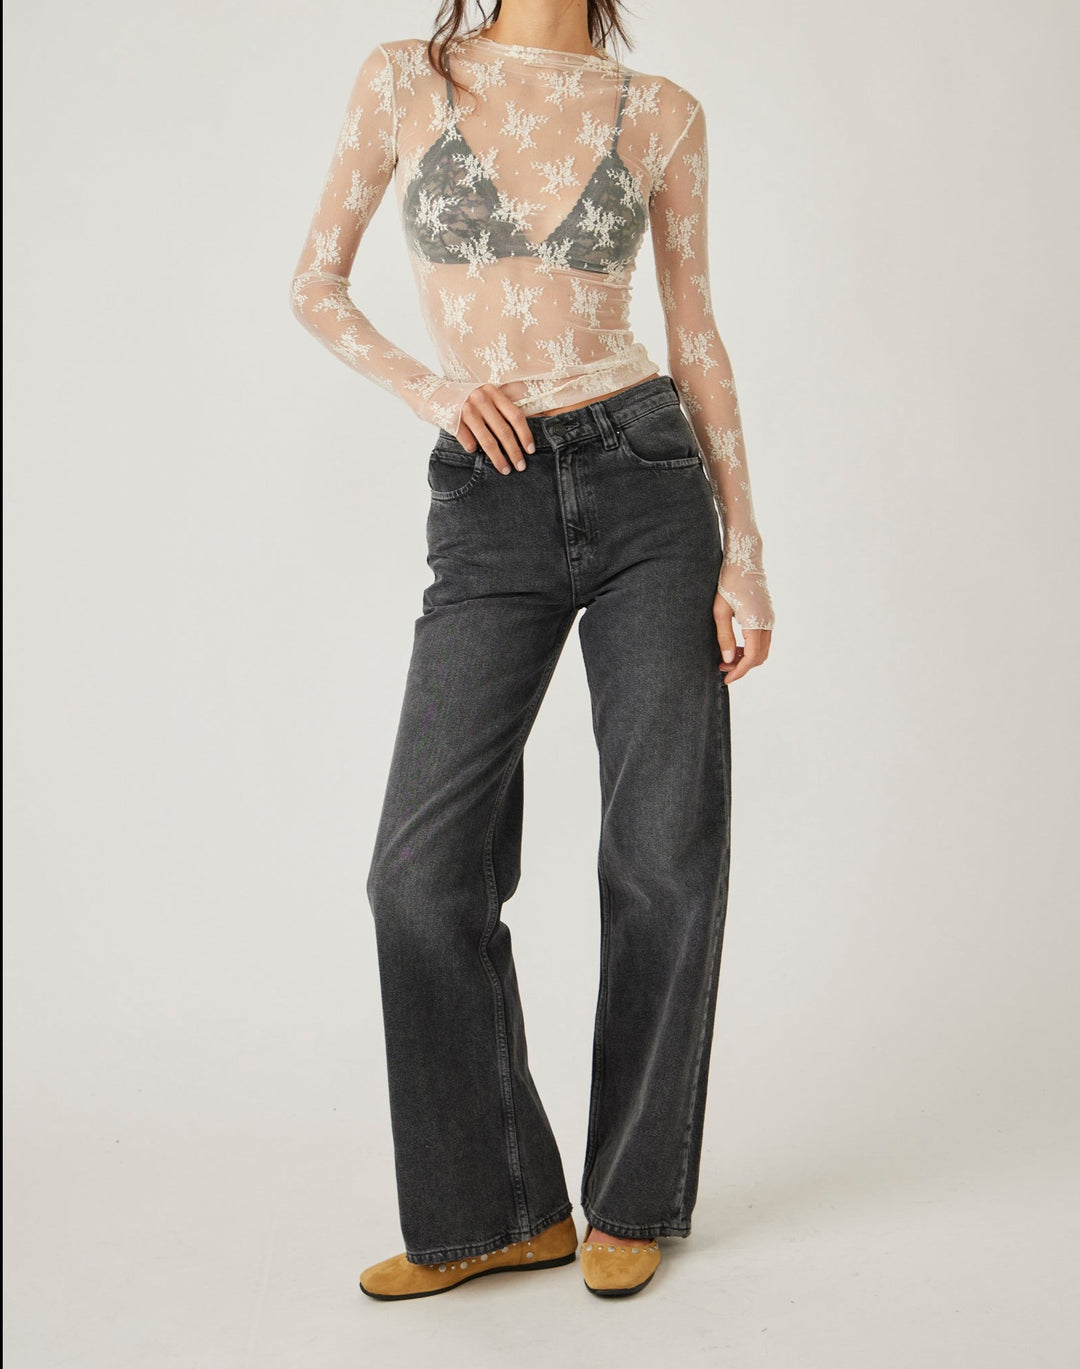 TINSLEY BAGGY HIGH RISE-BLOW OUT BLACK - Kingfisher Road - Online Boutique